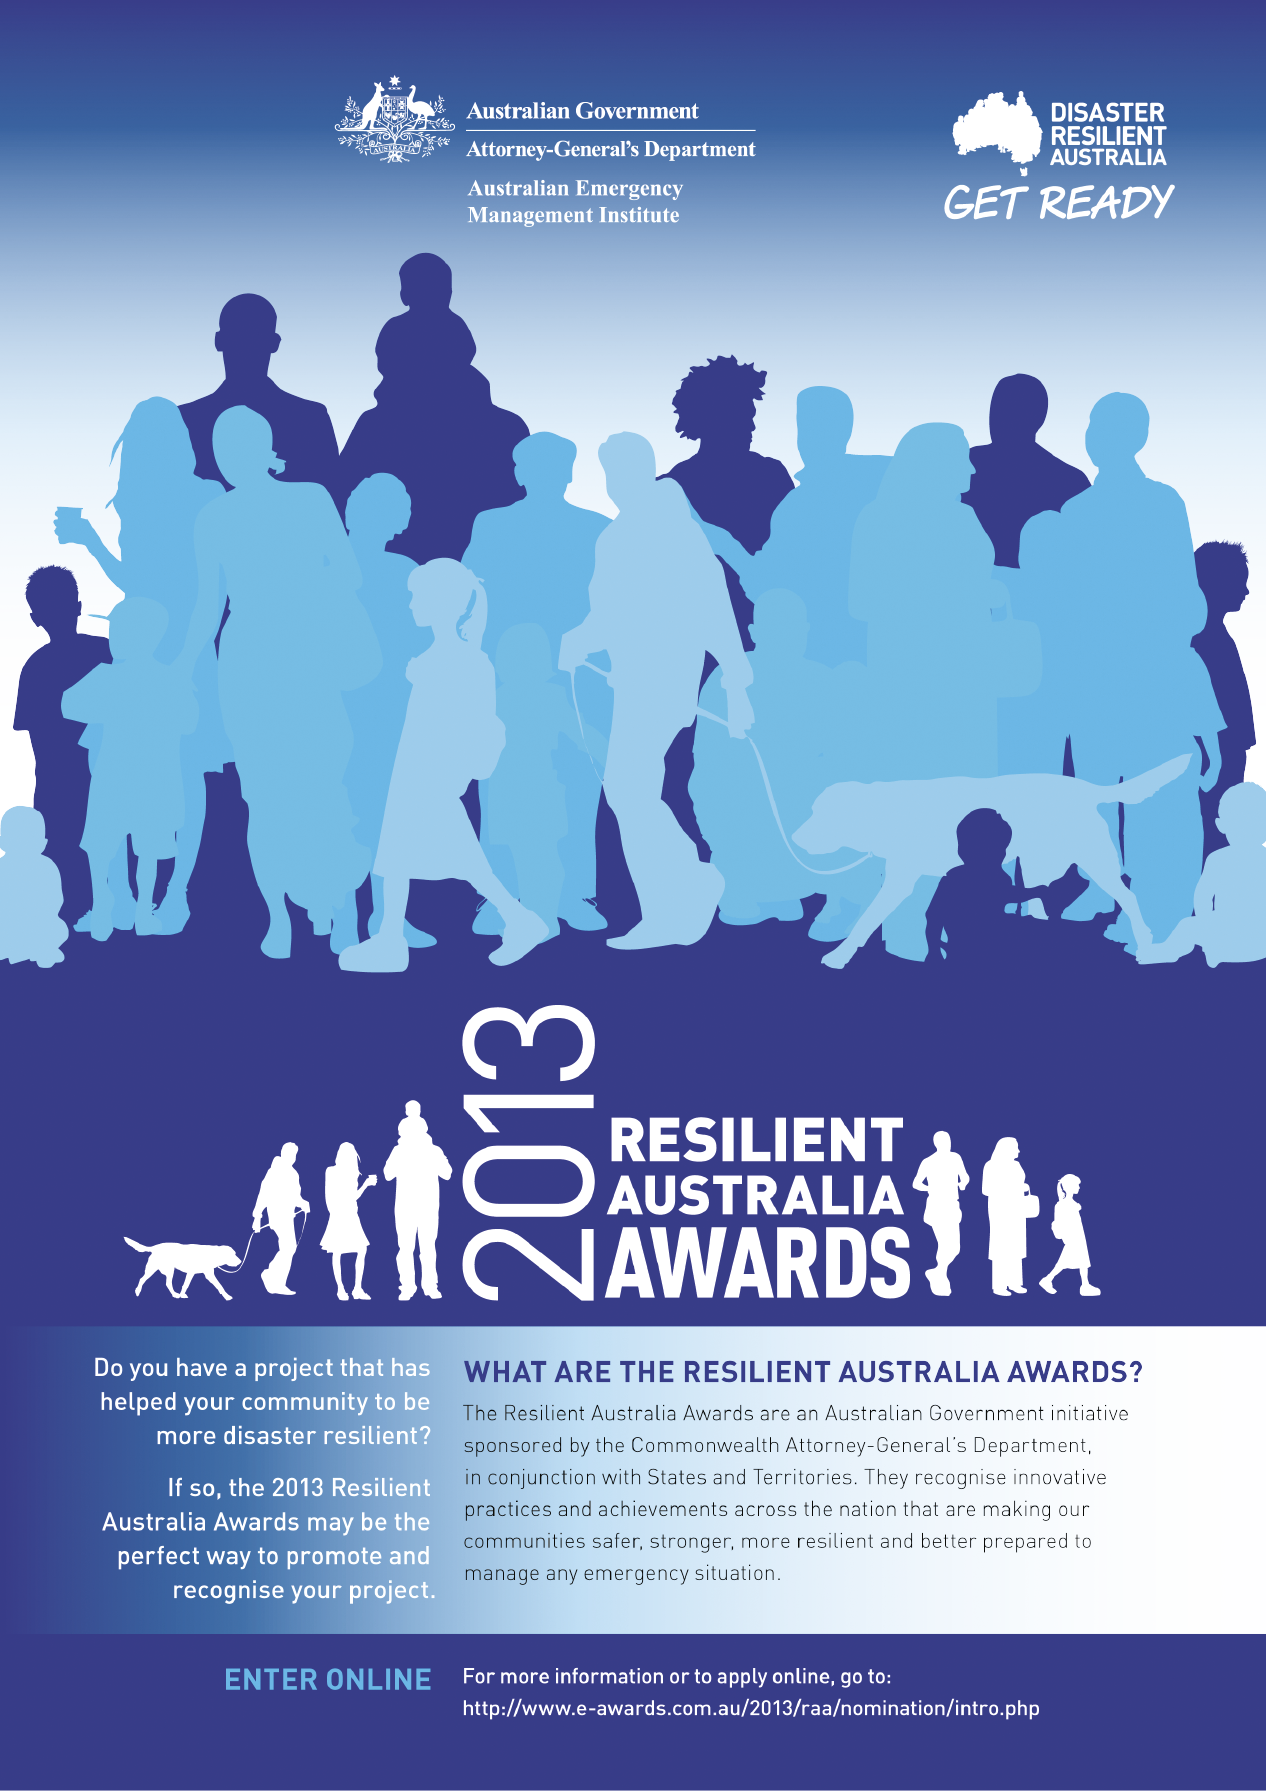 Advertisement for 2013 Resilient Australia Awards entry. Go to e-awards.com.au/2013/raa/nomination/intro.php for more